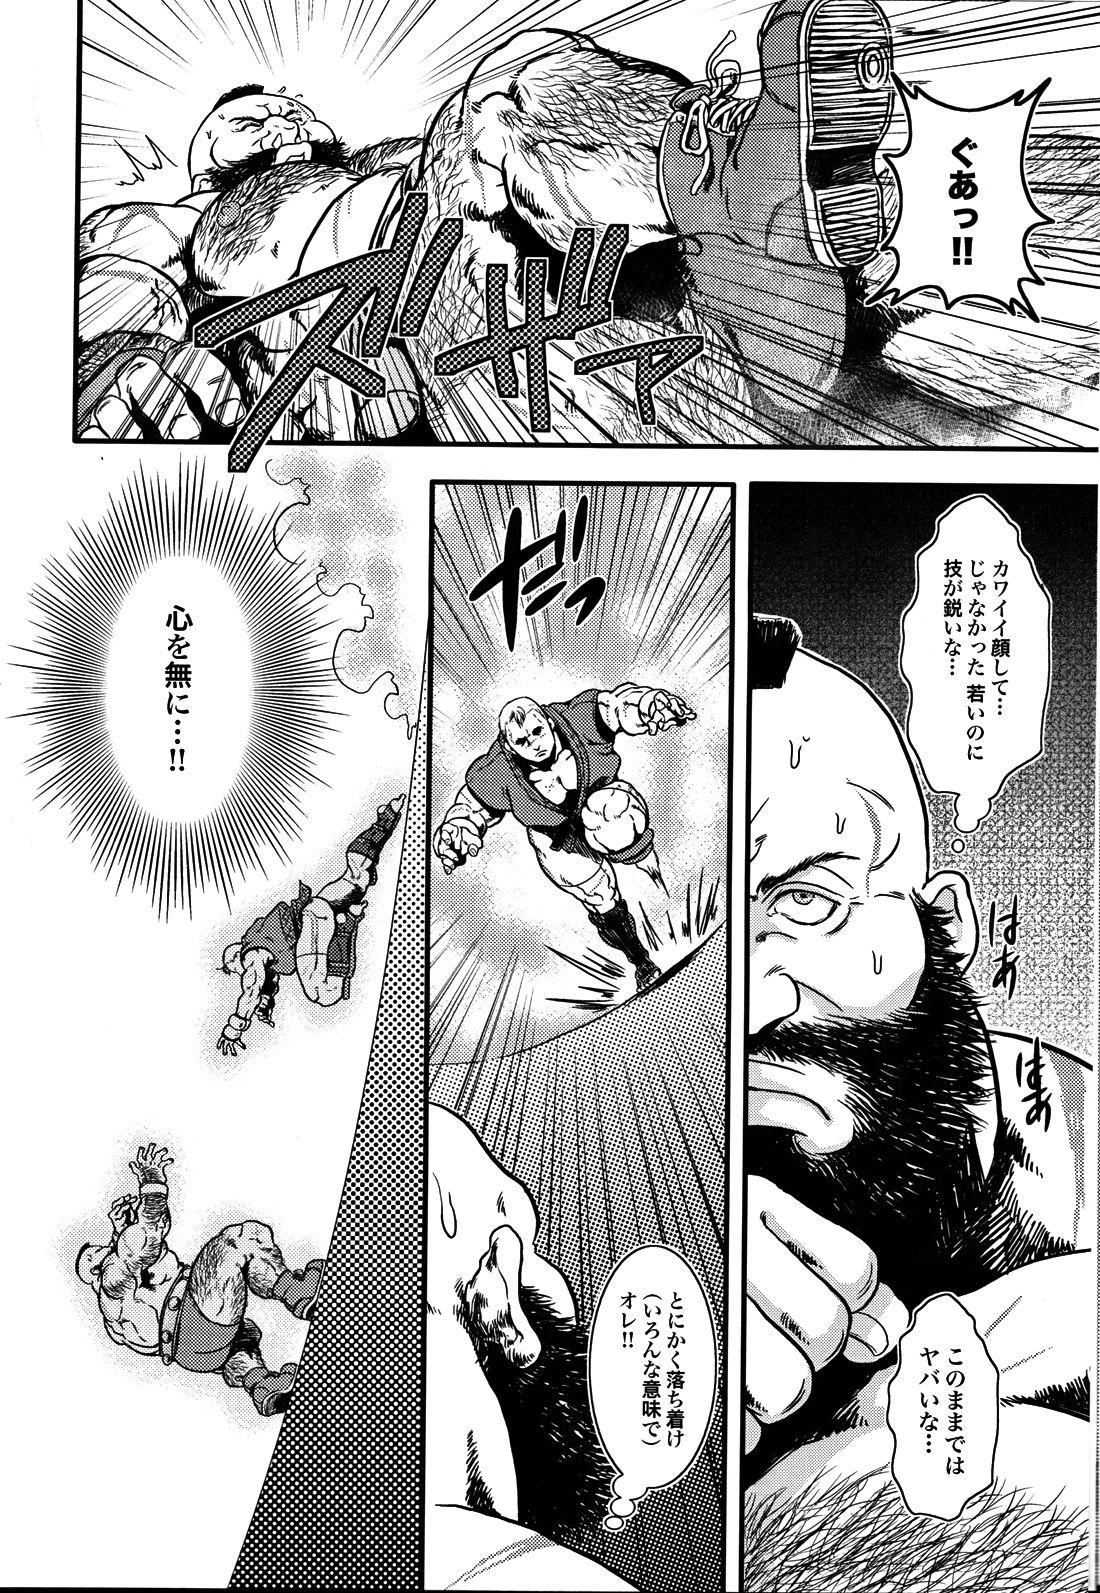 Spit Sweetest Memories - Street fighter Fucking Hard - Page 6